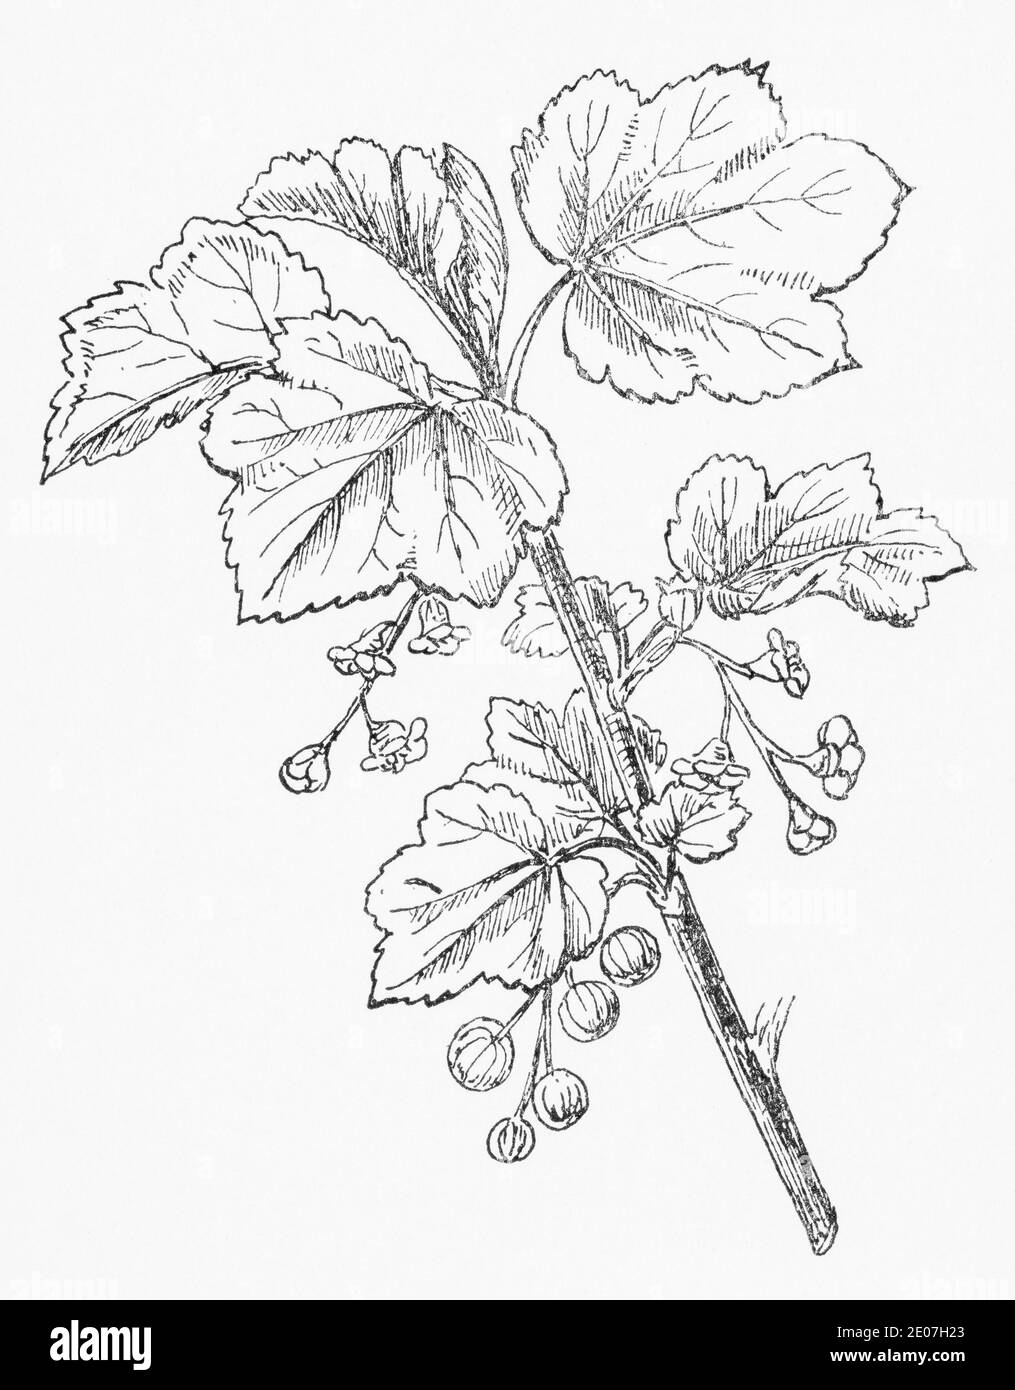 Old botanical illustration engraving of Red Currant, Redcurrant / Ribes rubrum. Traditional medicinal herbal plant. See Notes Stock Photo